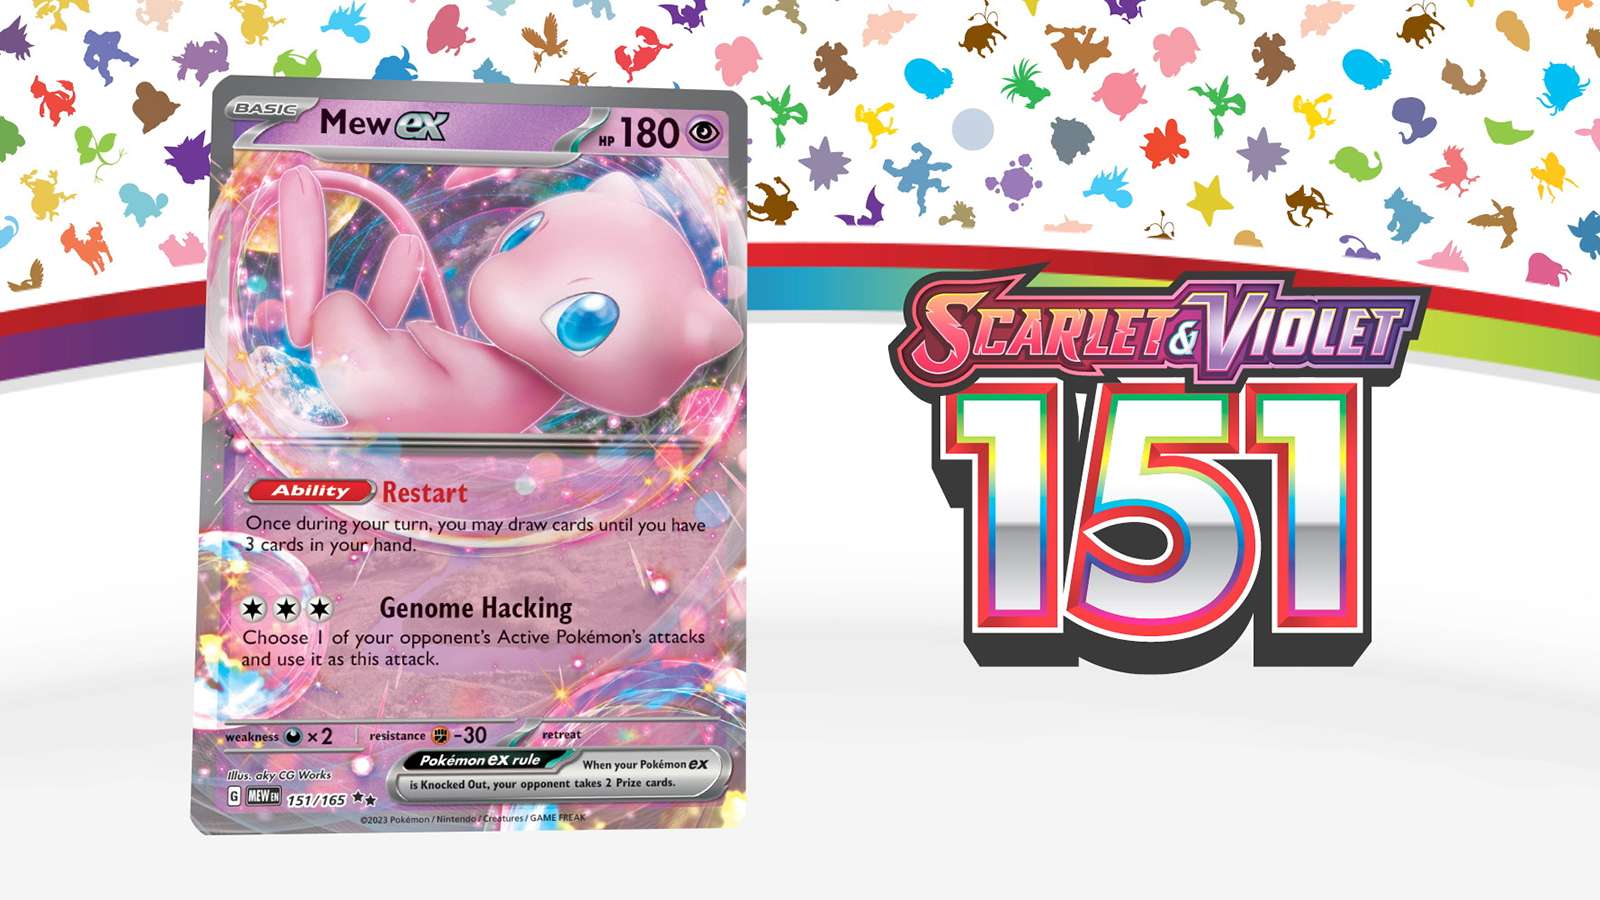 Mew in the Pokemon 151 TCG expansion